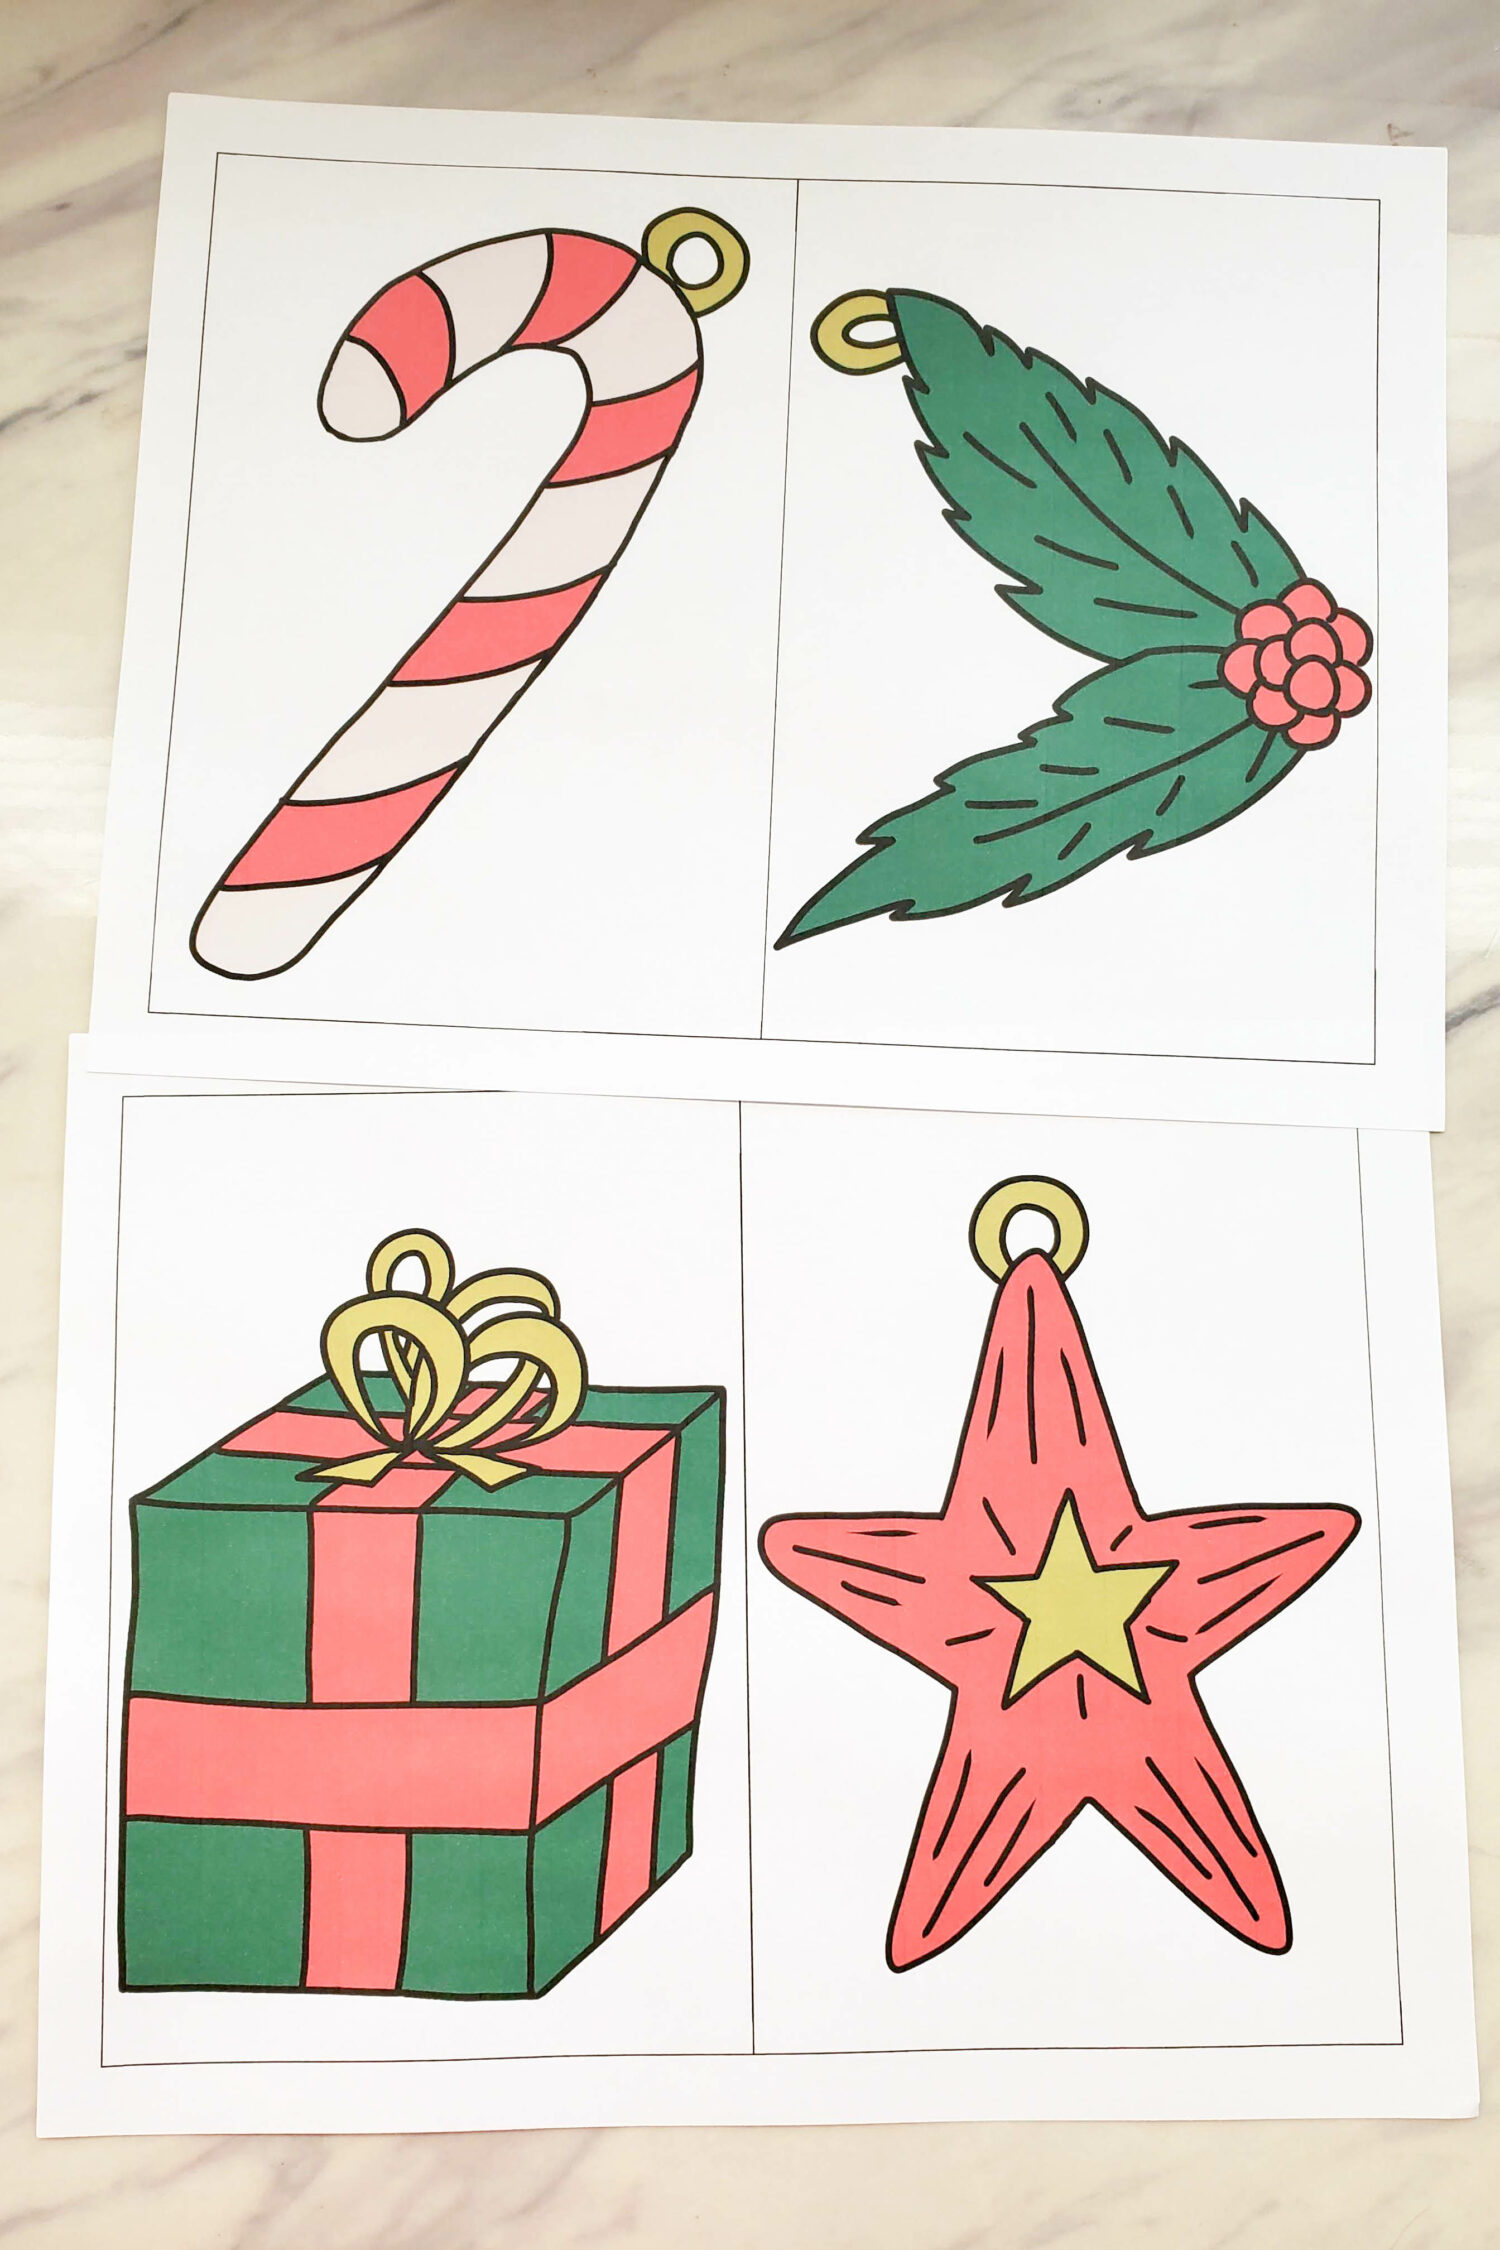 Decorate the Tree Christmas Ornaments fun singing time game and activity for LDS Primary music leaders. Let the kids pick out an ornament and add it to a a Christmas tree and sing the coordinating song or way to sing activity.